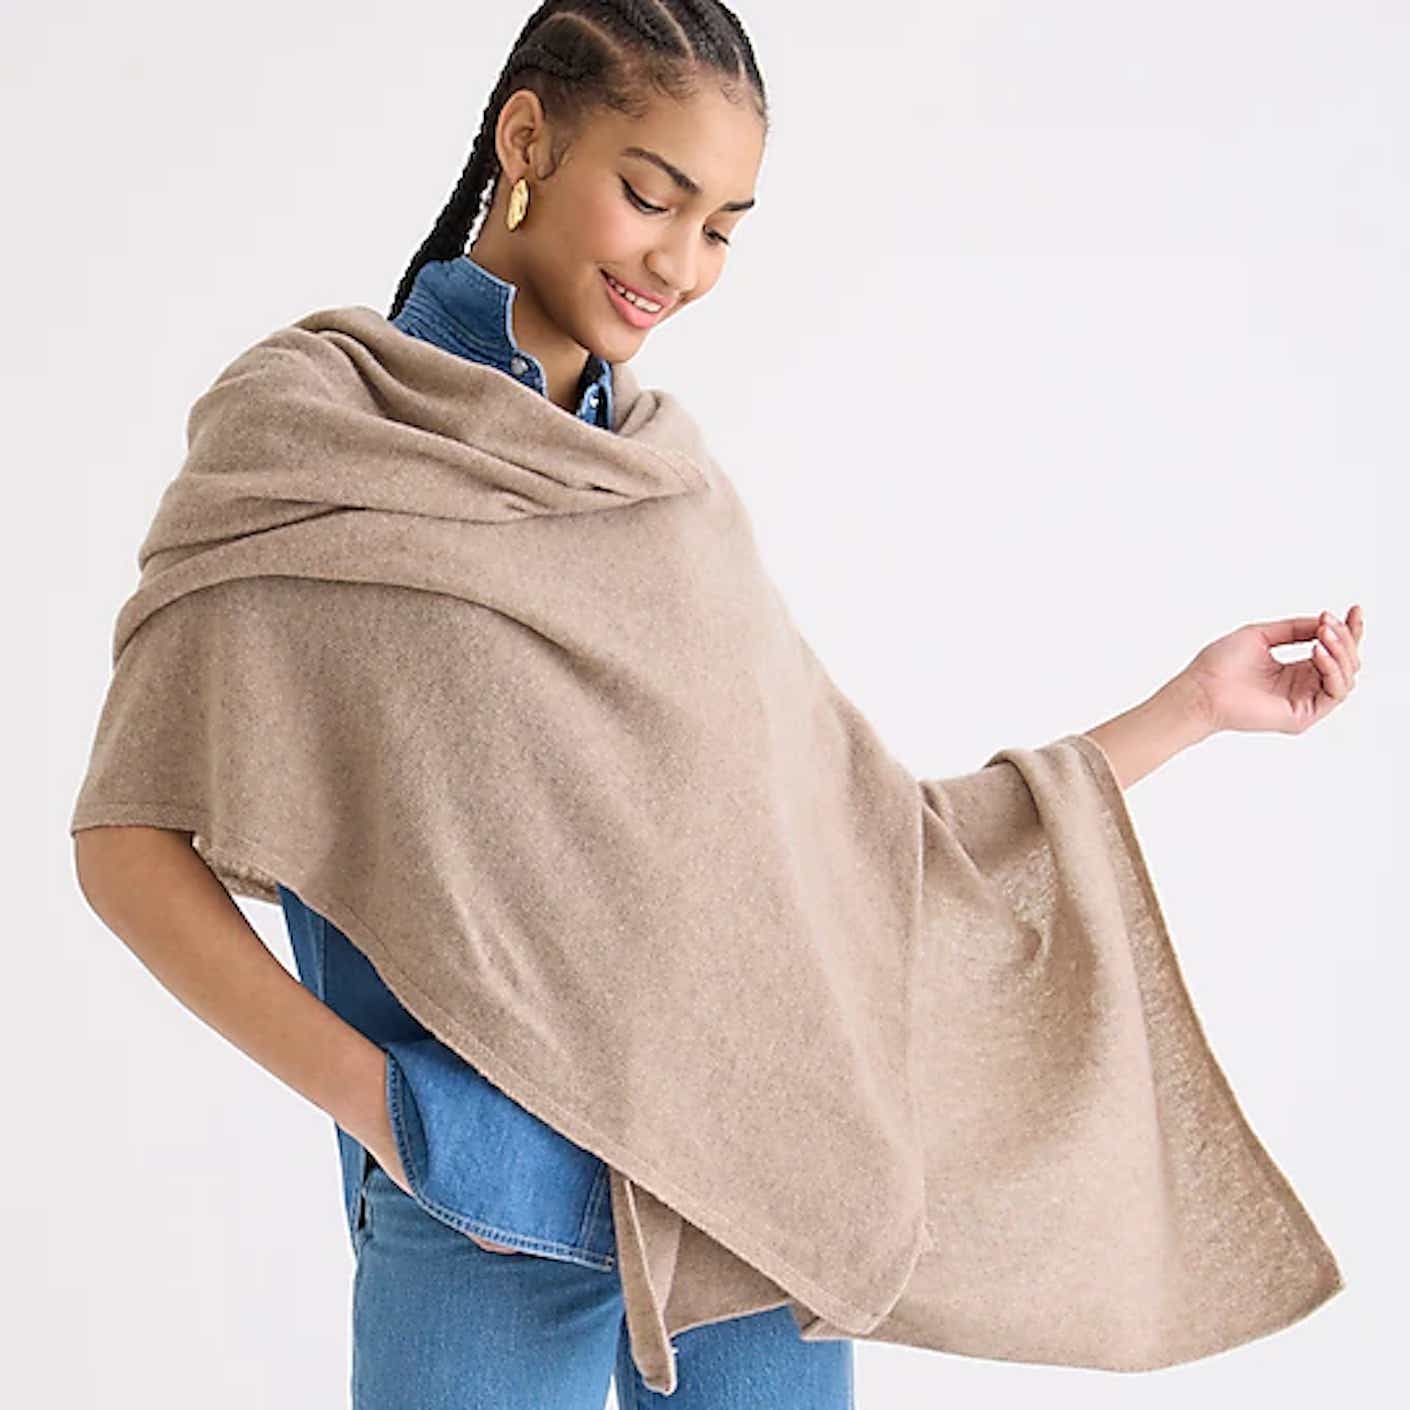 A woman wears a camel colored cashmere poncho that drapes over her shoulder.